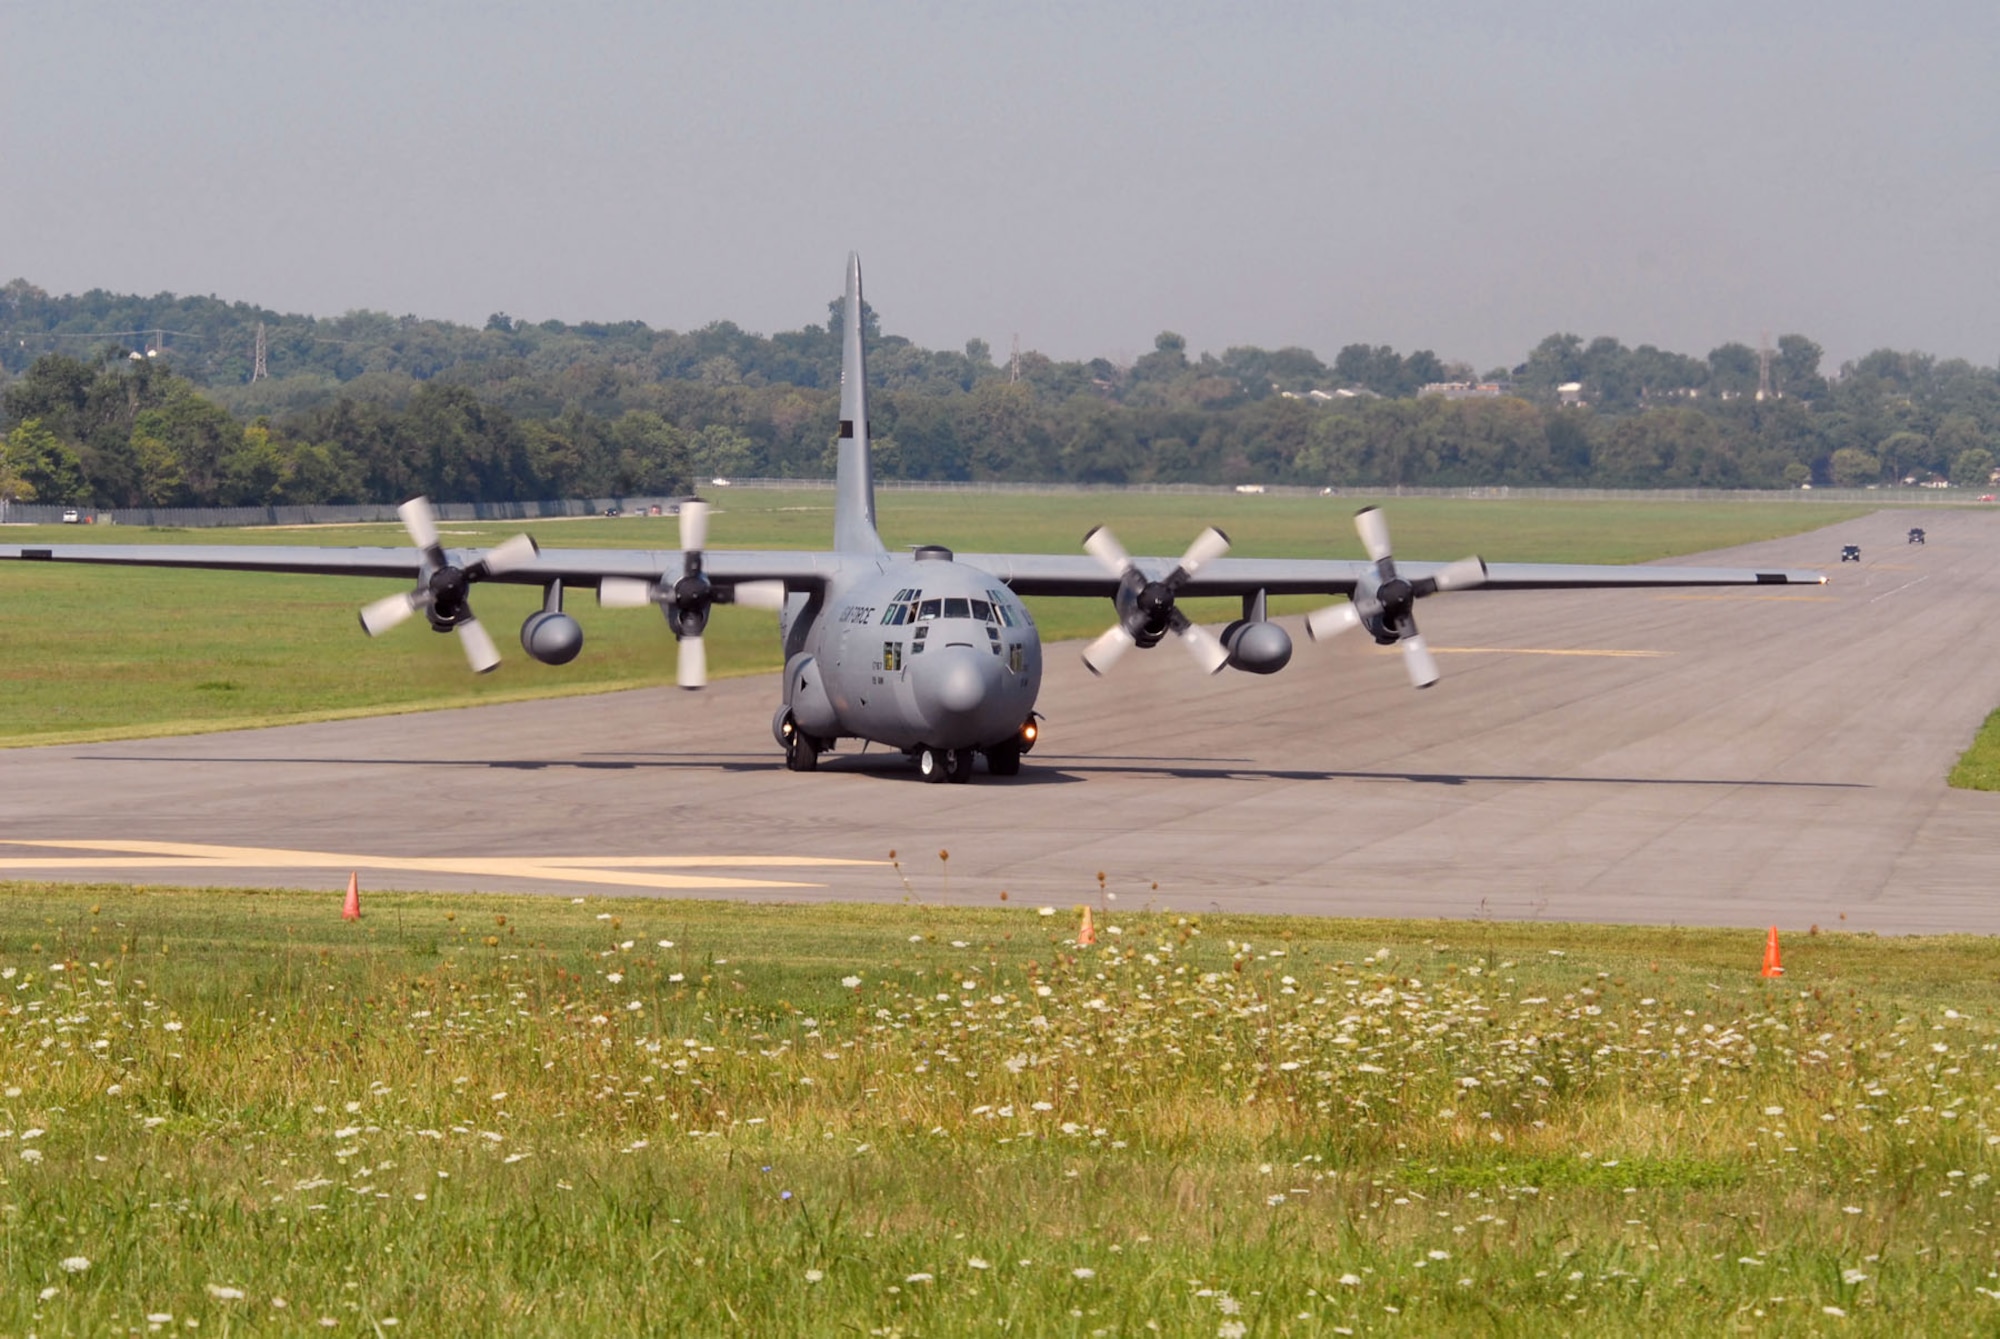 DAYTON, Ohio -- The C-130E SPARE 617 arrives at the National Museum of the U.S. Air Force after its final flight on Aug. 18, 2011. Not only is this C-130E (S/N 62-1787) representative of all C-130 transport aircraft, it also performed courageous work during the Southeast Asia War. Two members of its crew – Capt. William Caldwell, pilot, and Tech. Sgt. Charlie Shaub, loadmaster – were awarded Air Force Crosses, the U.S. Air Force’s second highest award for valor, for their heroic actions during the siege of An Loc in 1972. (U.S. Air Force photo by Jeff Fisher)